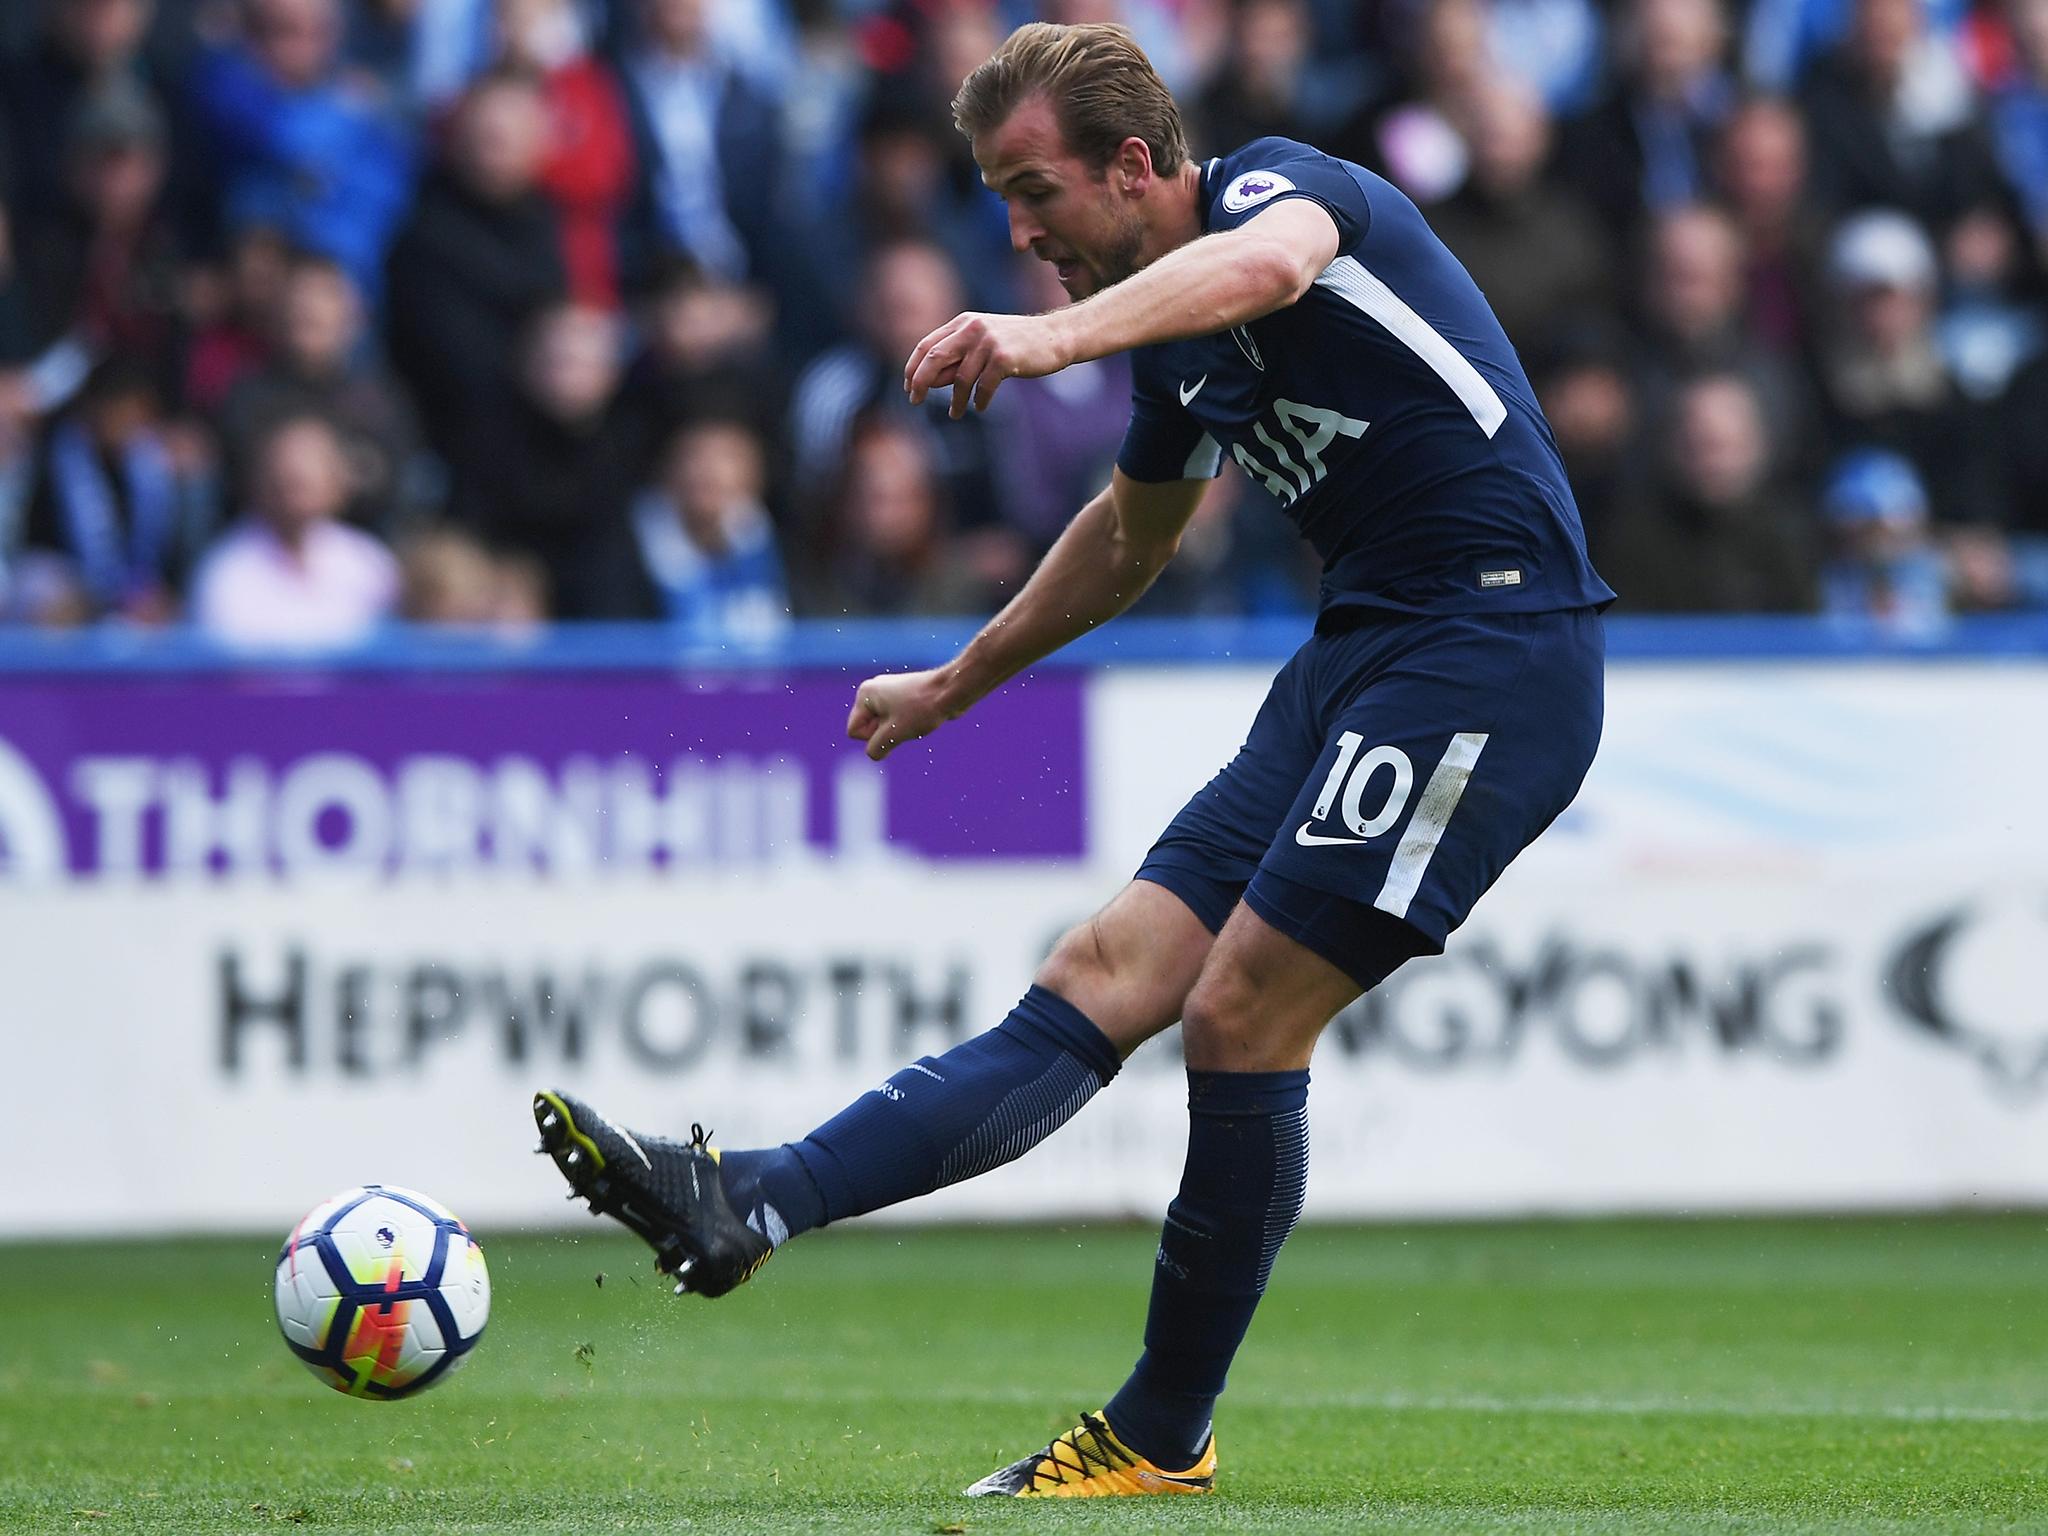 Harry Kane fires Spurs into the lead against Huddersfield Town